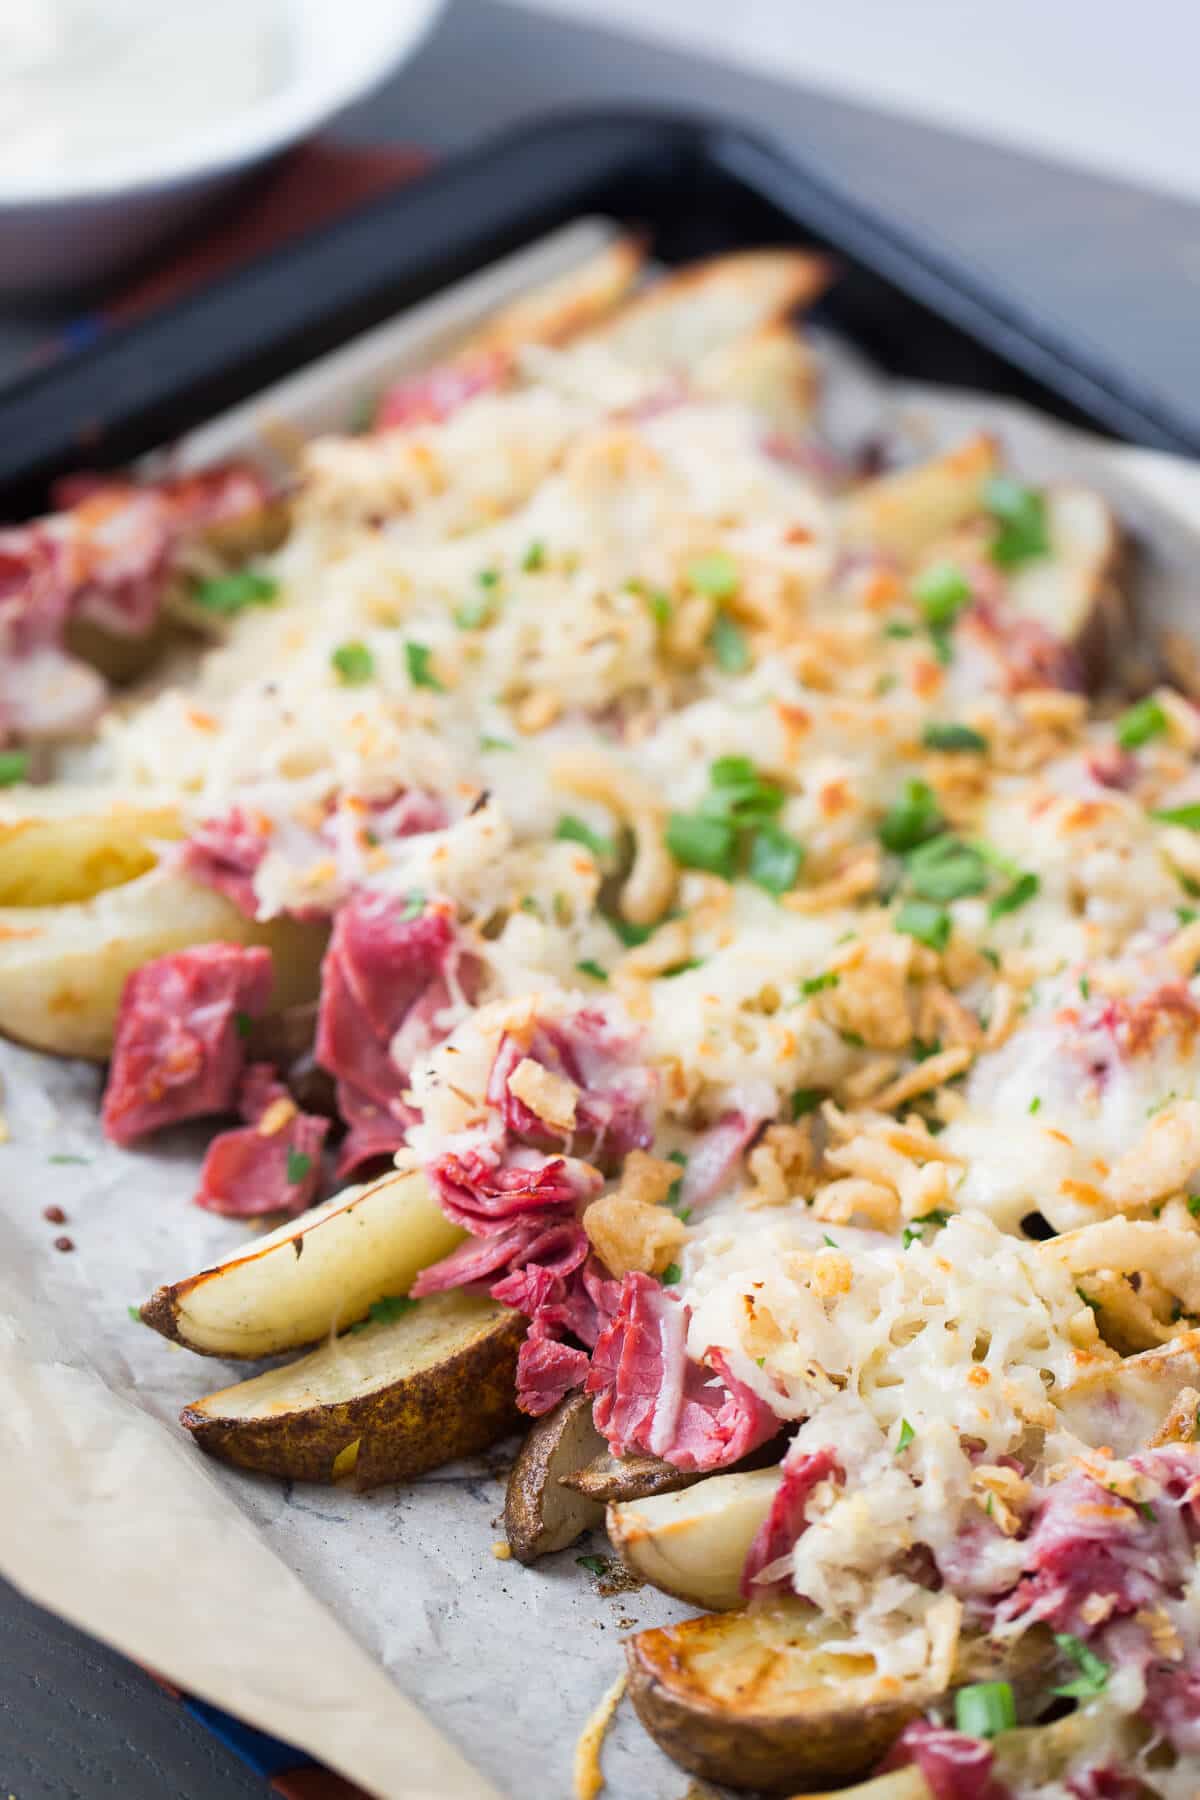 This loaded potato recipe is the best! Reuben toppings make it fun!